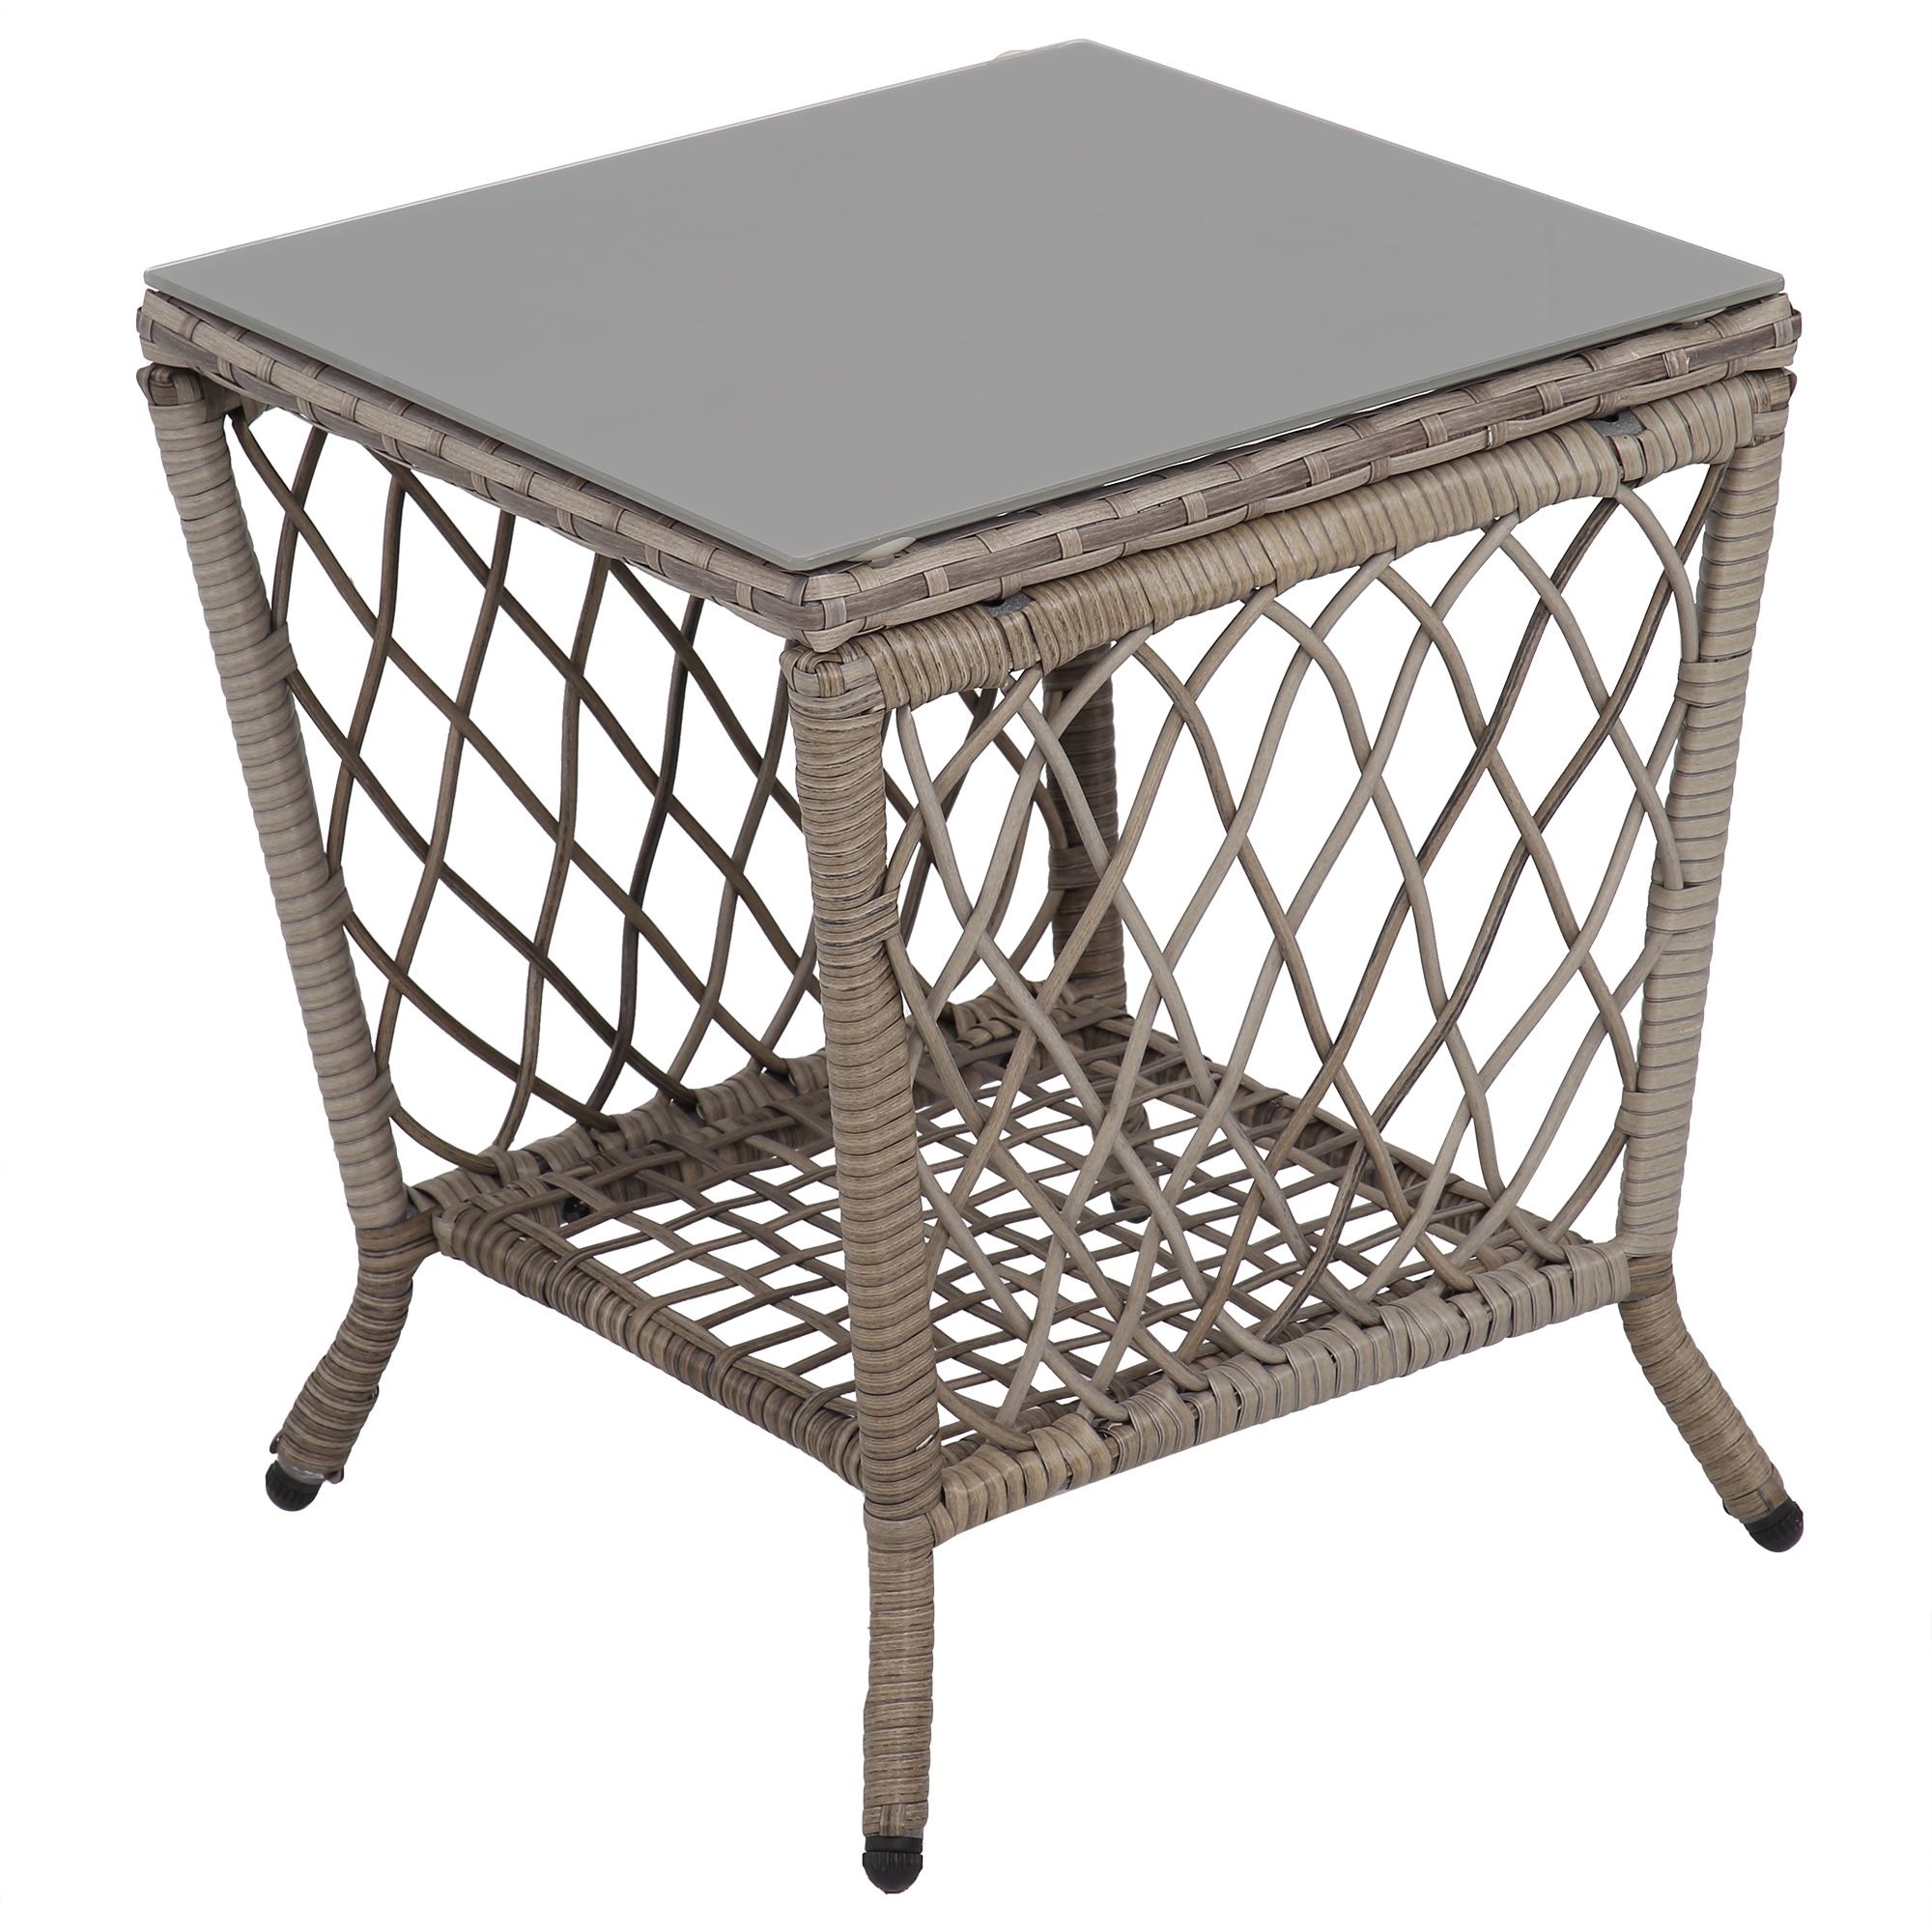 Glass Outdoor Tables With Storage Shelf For Latest Superjoe Wicker Side Table Outdoor Glass Top Square End Table With Storage  Shelf,metal Frame,gray – Walmart (View 8 of 15)